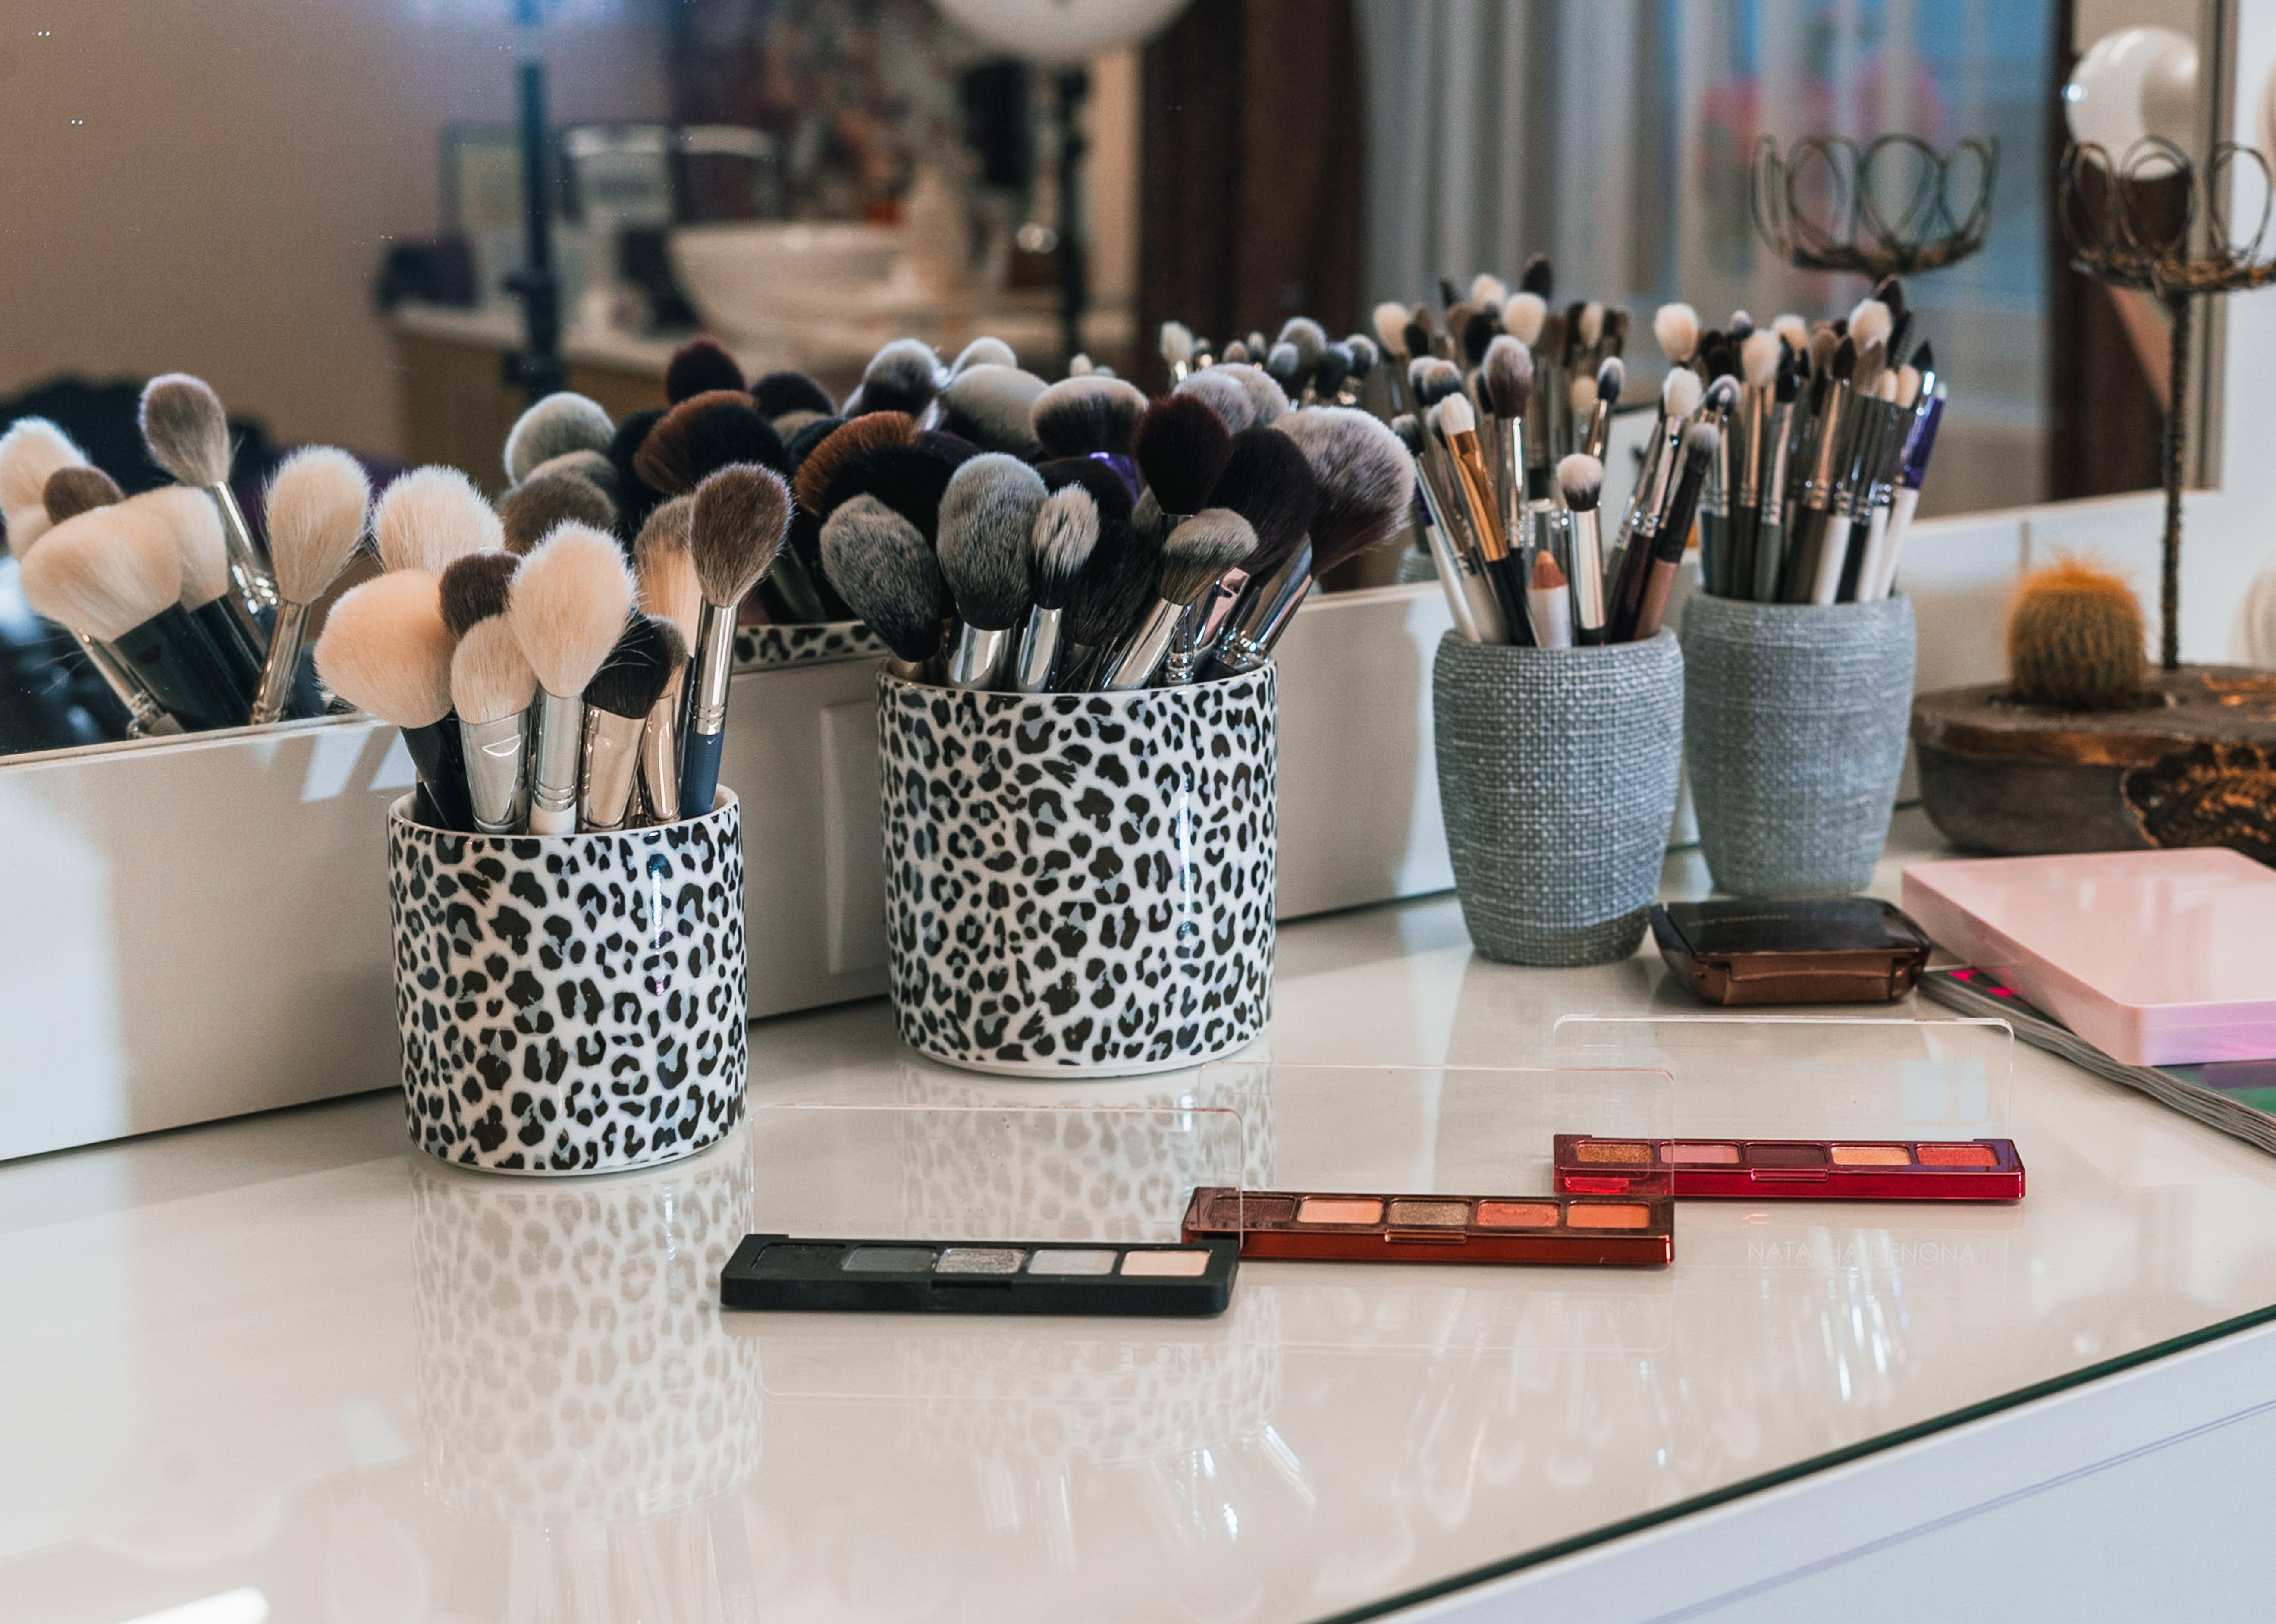 How to Start a Makeup Business